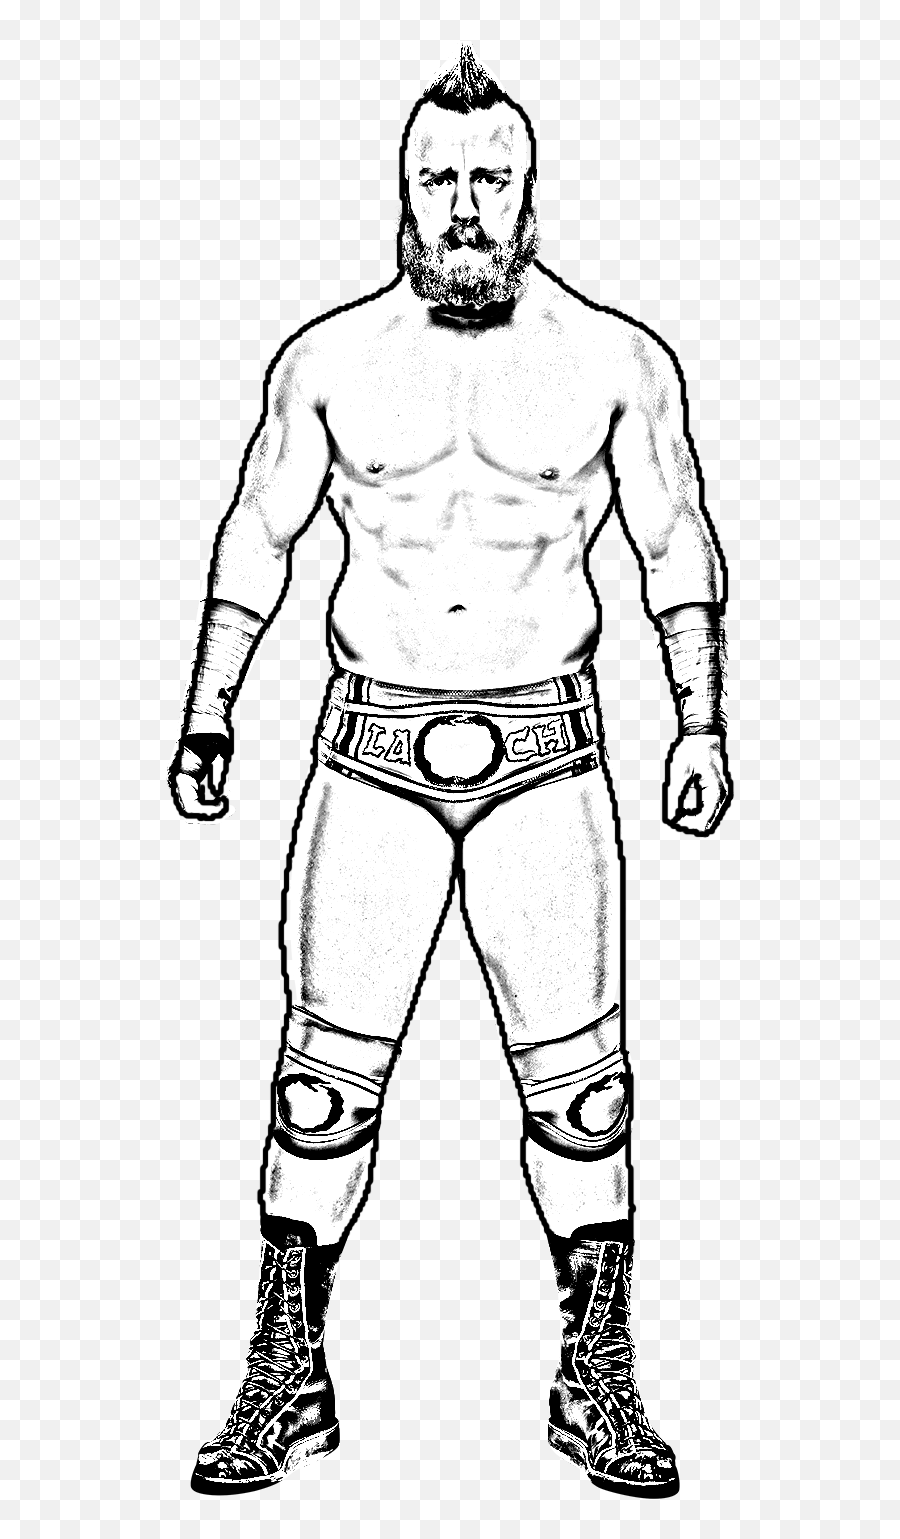 Sheamus From Wwe World Wrestling Entertainment Coloring Page Emoji,Sheamus Png